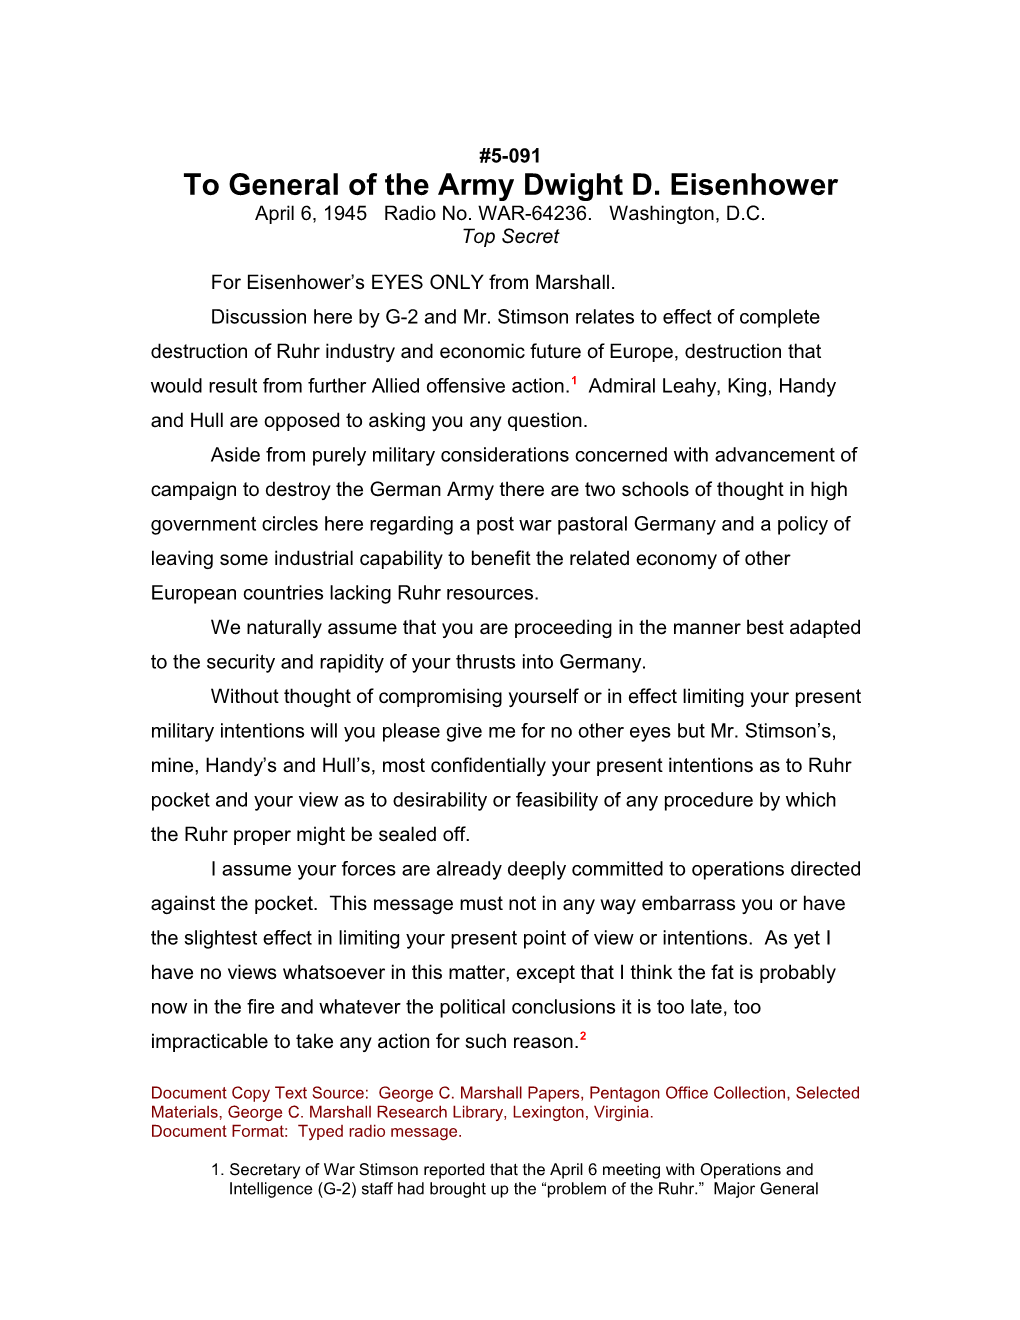 To General of the Army Dwight D. Eisenhower s1